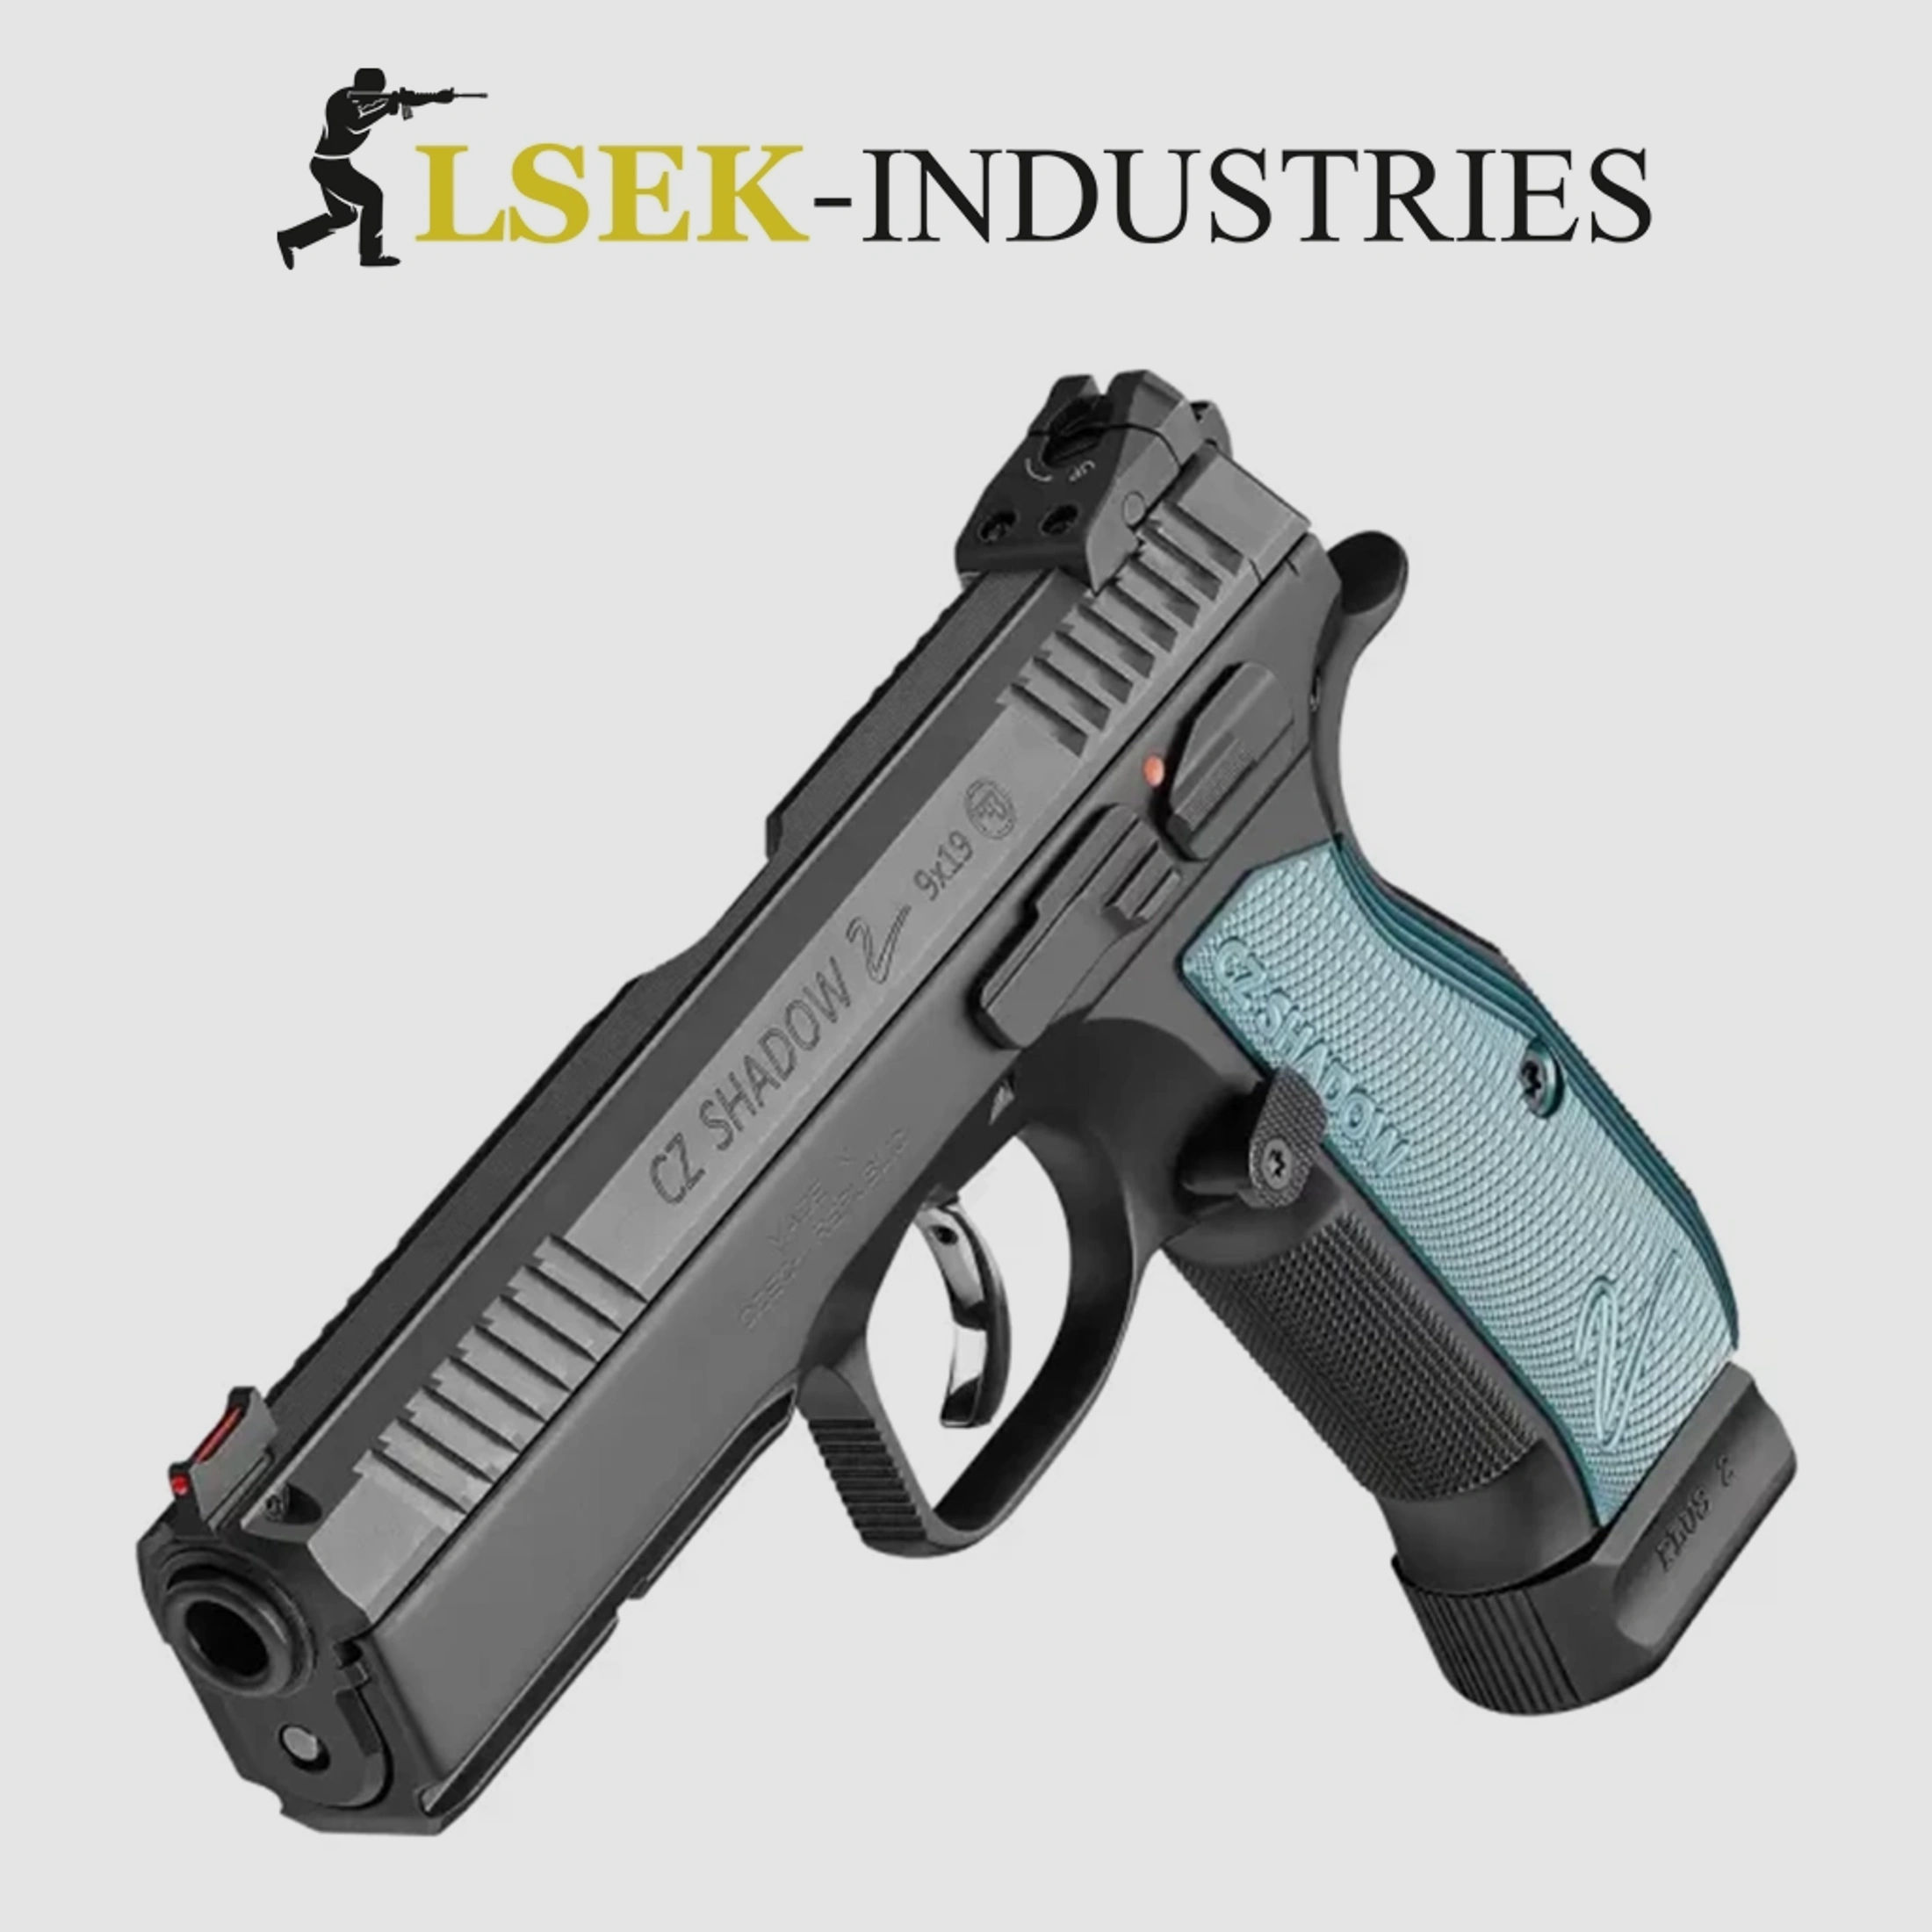 CZ – SHADOW 2 Double Action